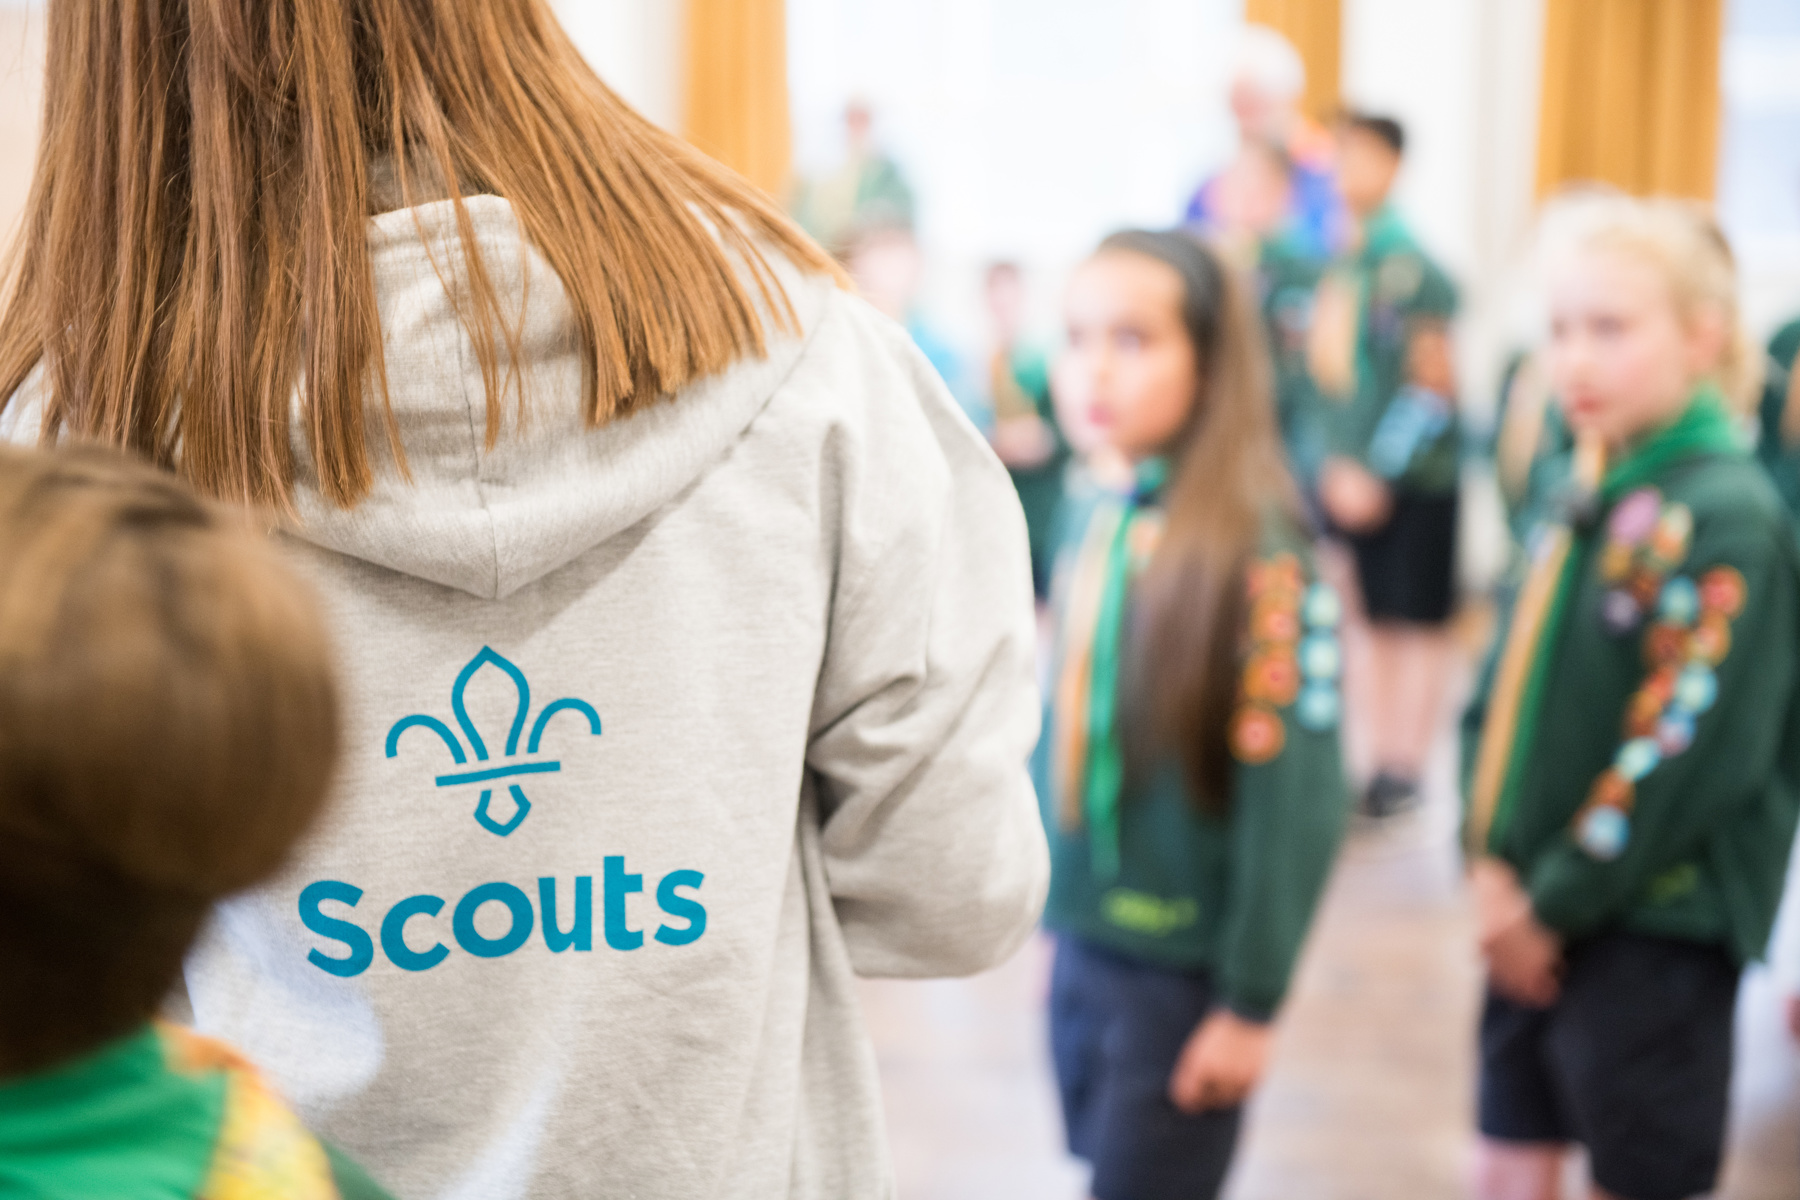 Female volunteer with her back turned showing the Scouts logo